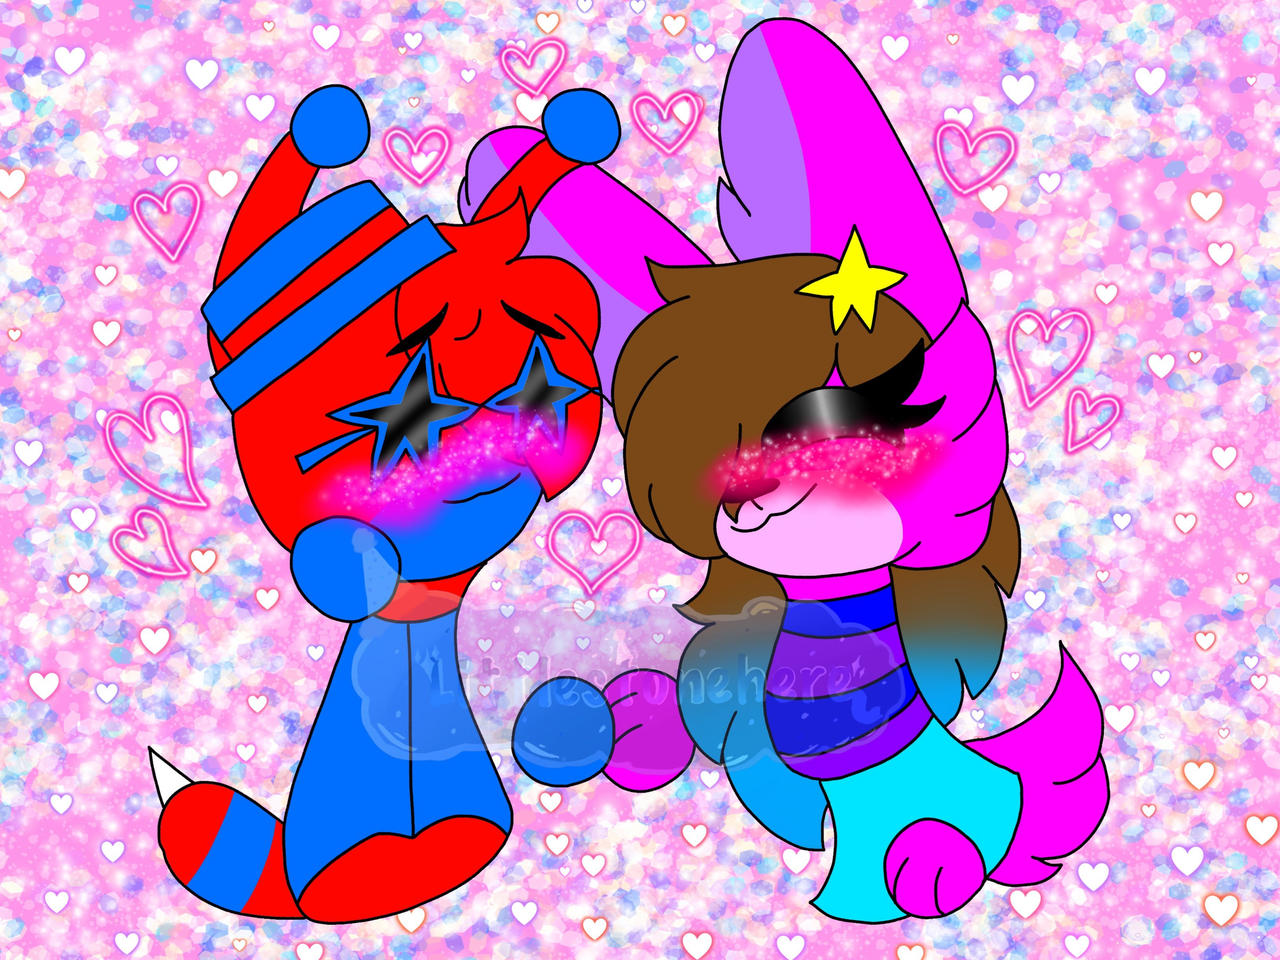 Blue x Pink Forever // Rainbow Friends by GorgeousCubanWeasel on DeviantArt